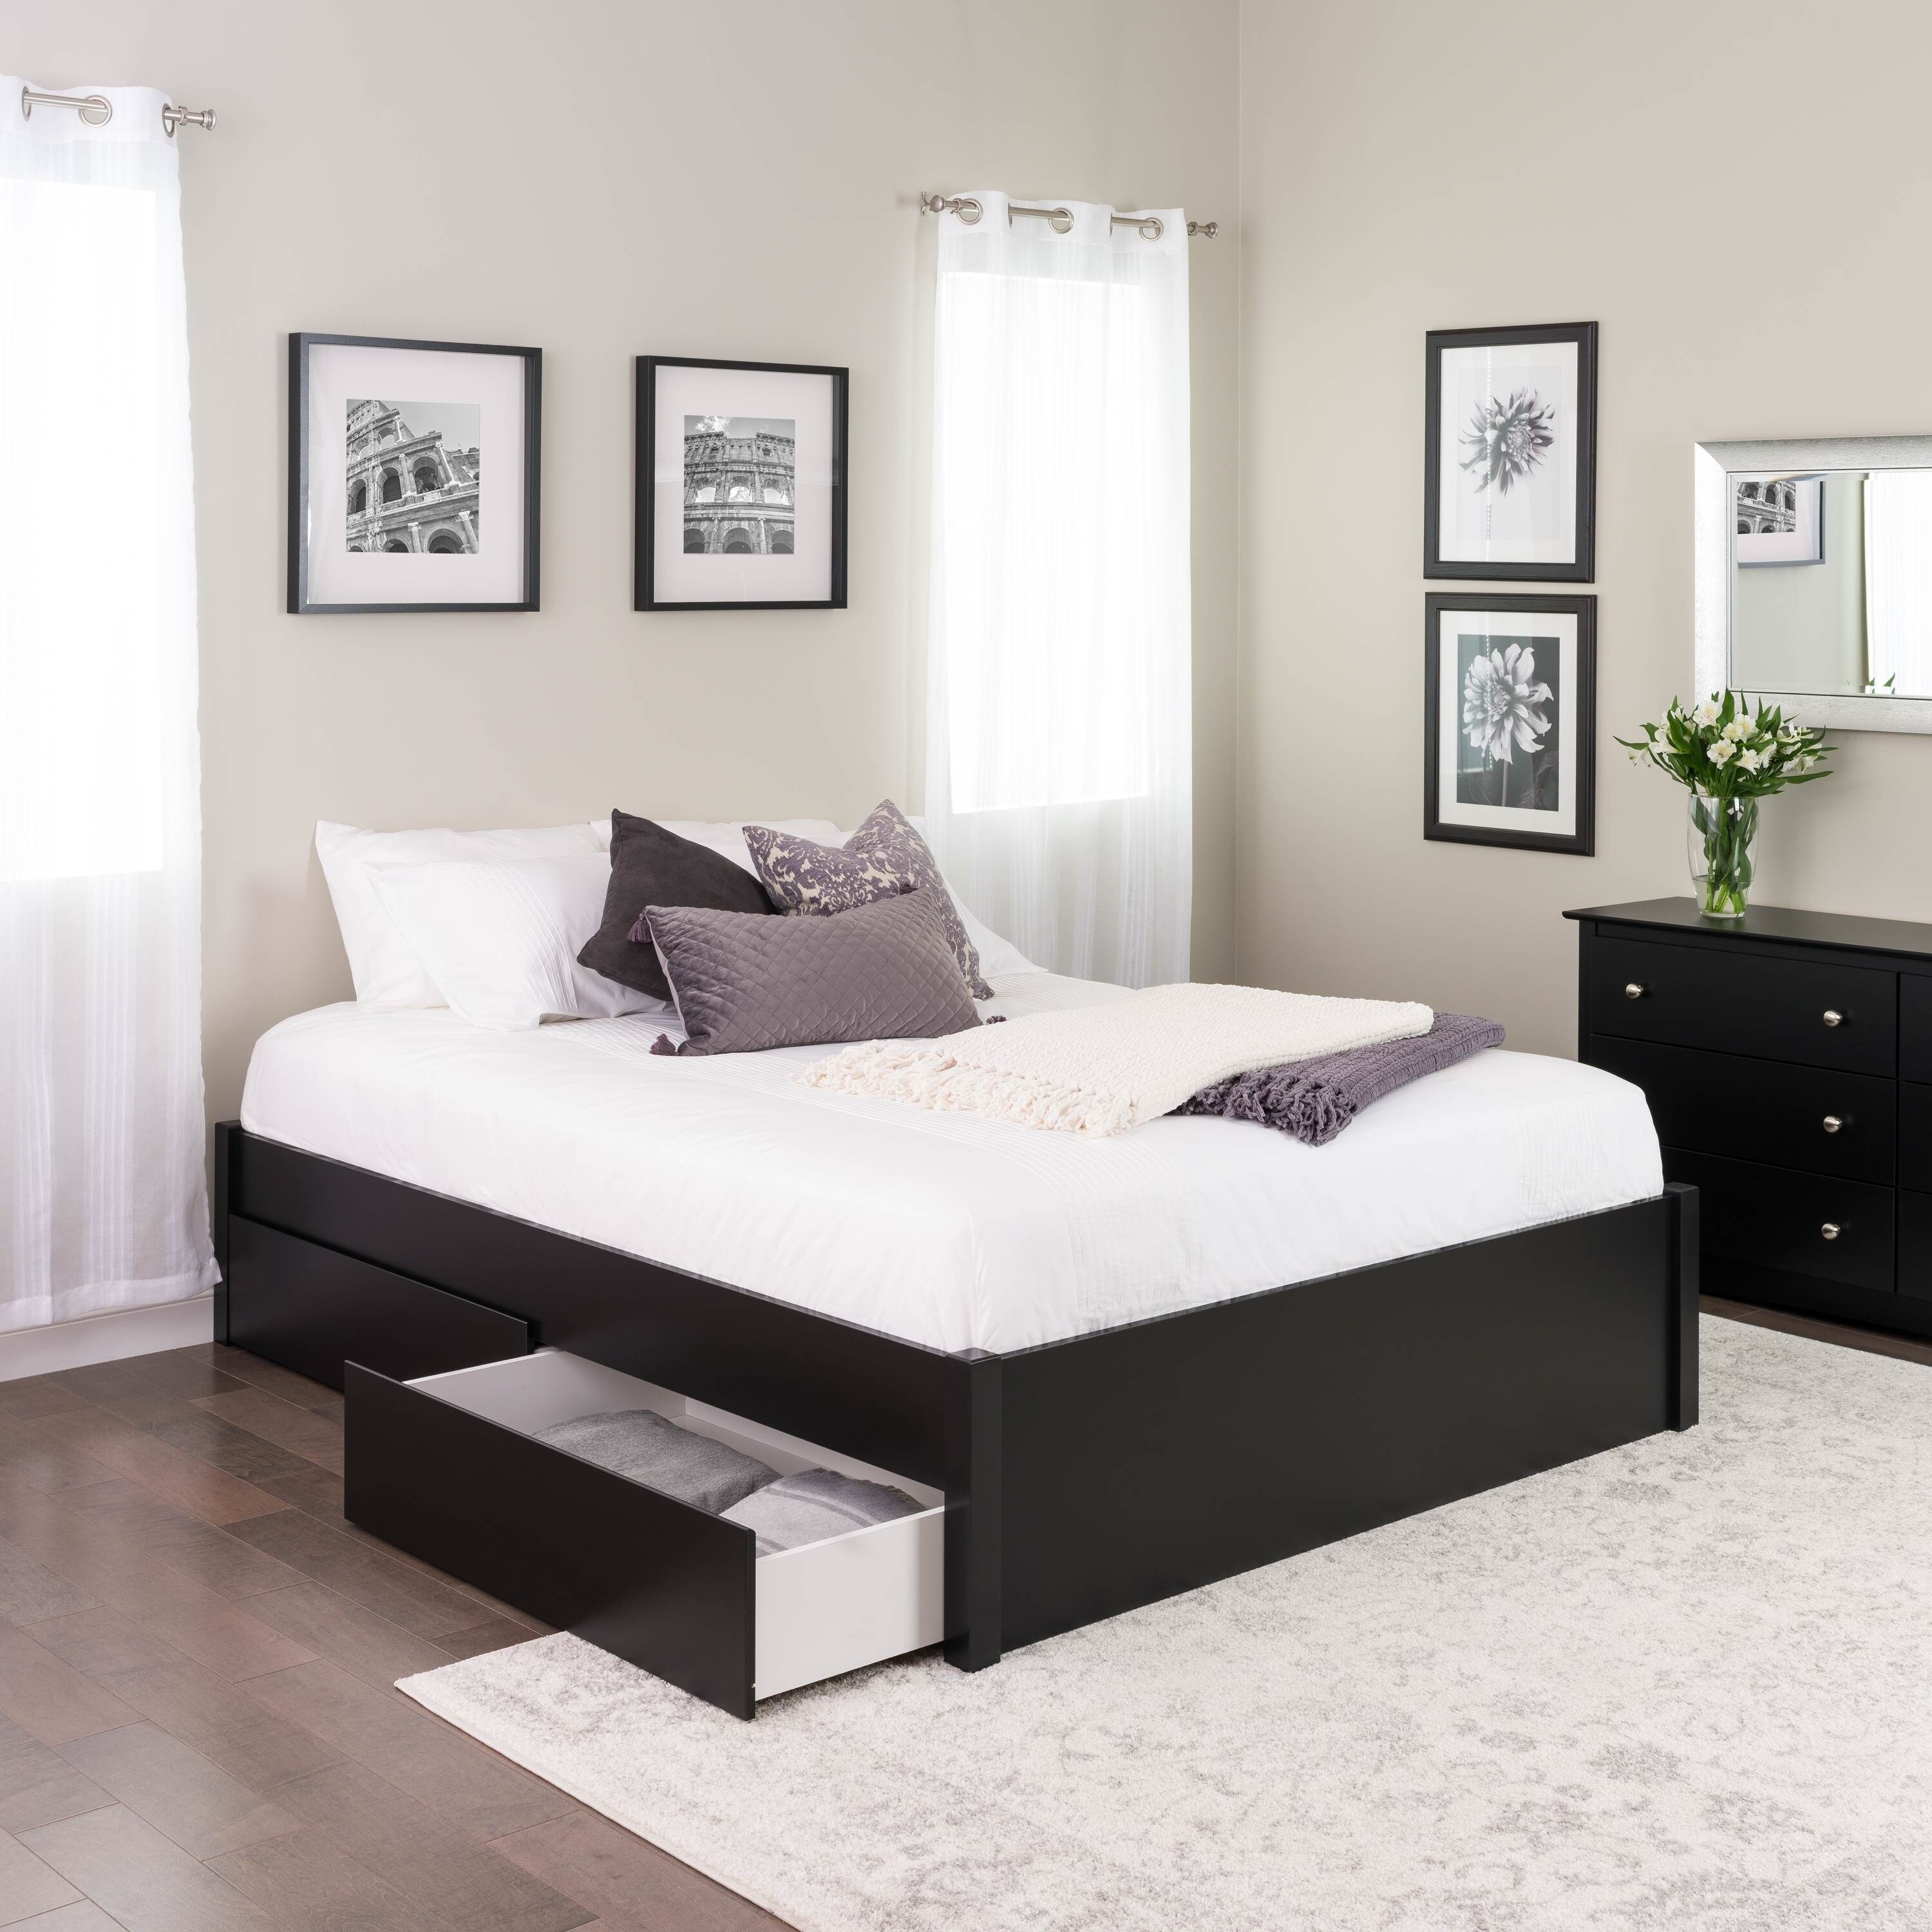 Shop Prepac Queen Select 4 Post Platform Bed With Optional Drawers